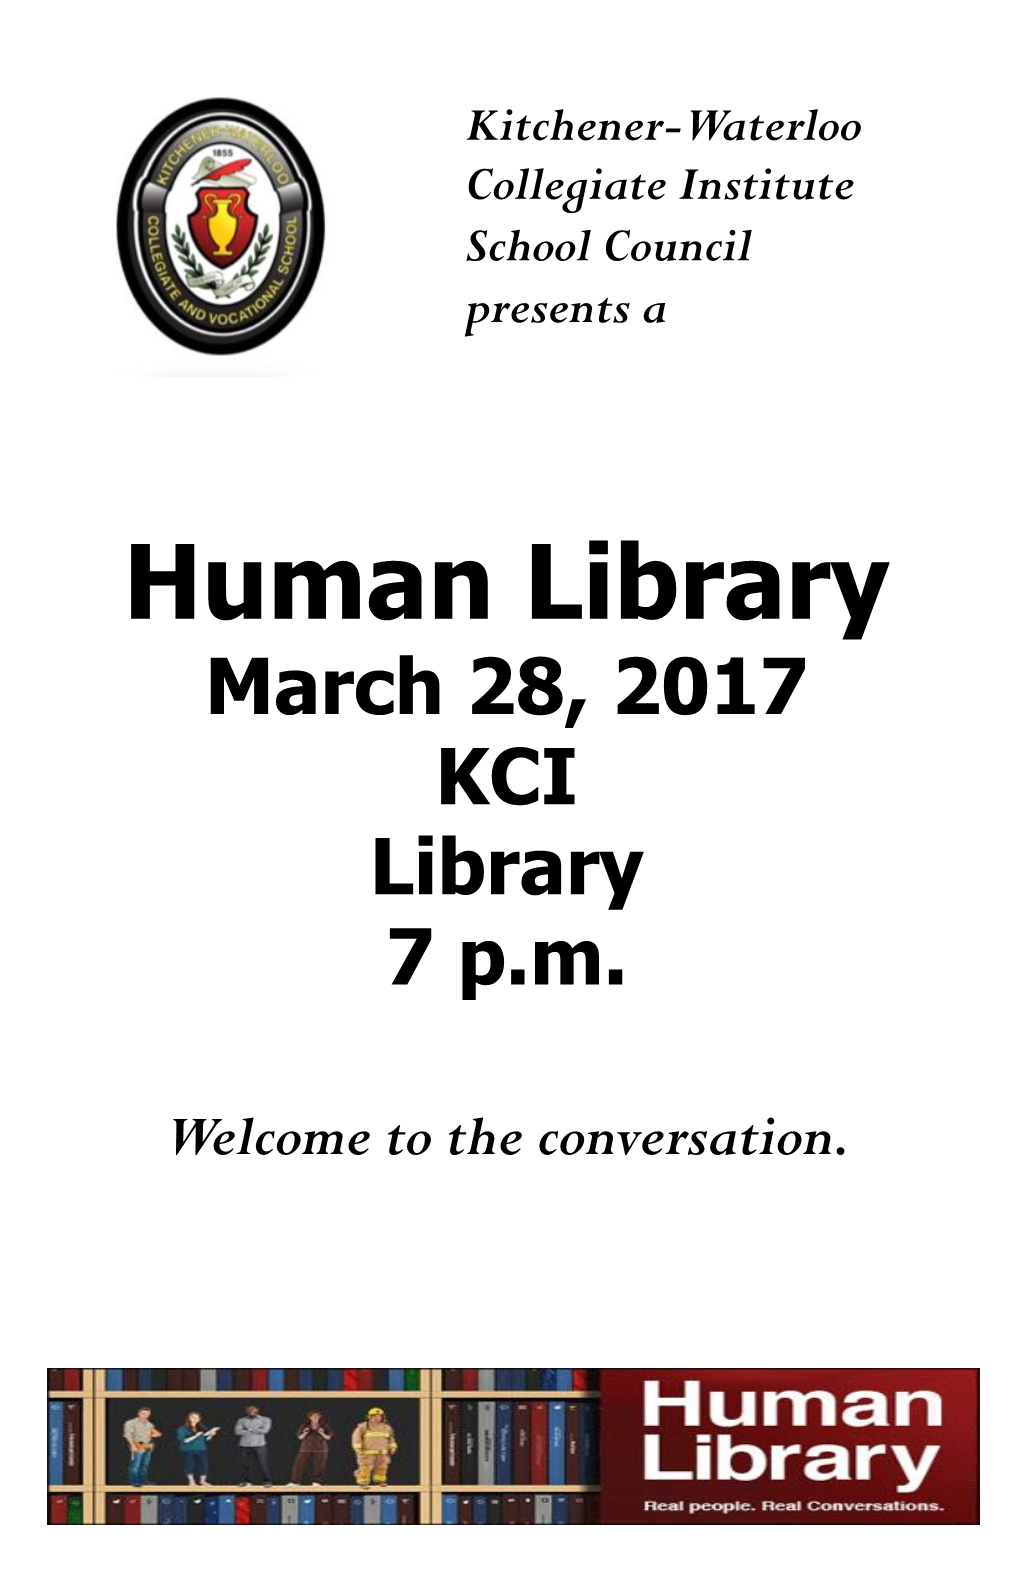 Human Library March 28, 2017 KCI Library 7 P.M